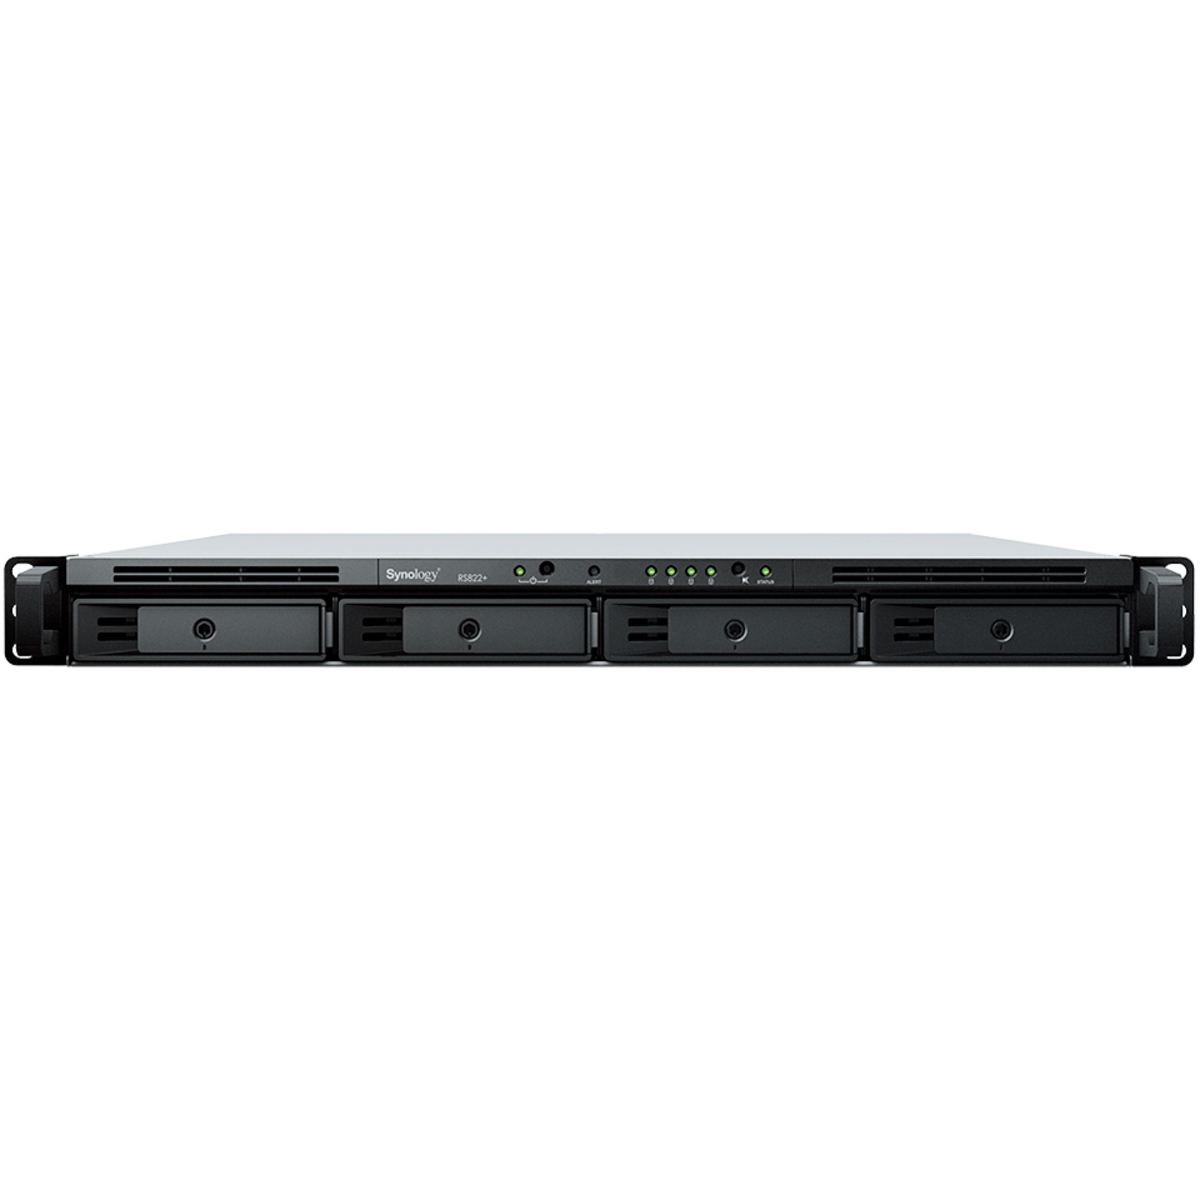 buy $2515 Synology RackStation RS822RP+ 8tb RackMount NAS - Network Attached Storage Device 4x2000gb Western Digital Red SA500 WDS200T1R0A 2.5 560/530MB/s SATA 6Gb/s SSD NAS Class Drives Installed - Burn-In Tested - nas headquarters buy network attached storage server device das new raid-5 free shipping usa RackStation RS822RP+